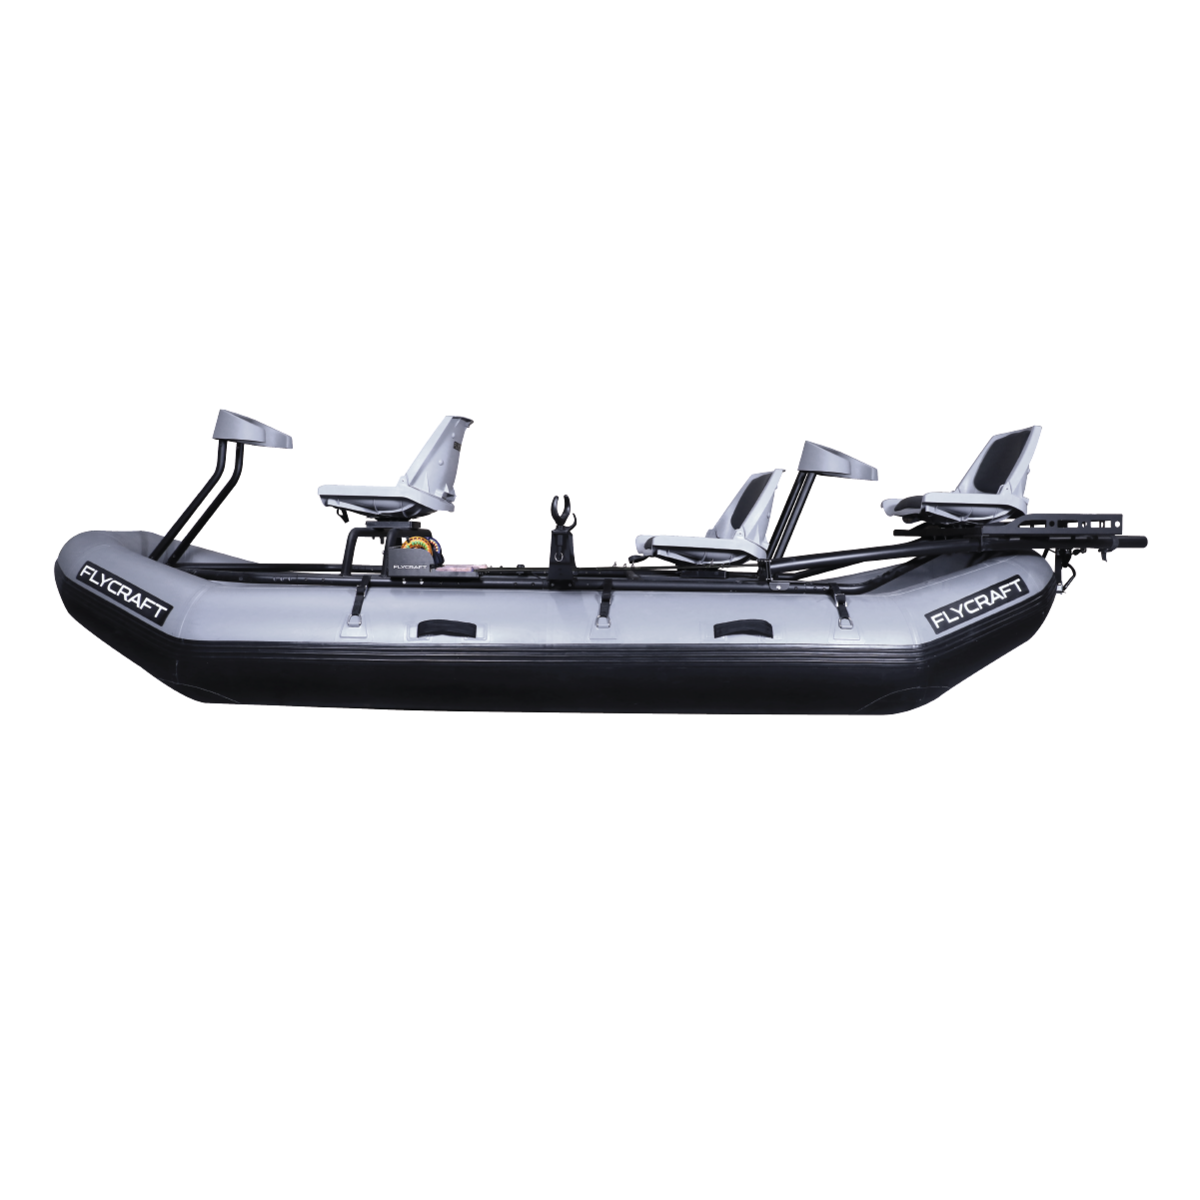 Stealth X Inflatable Boat Flycraft Usa